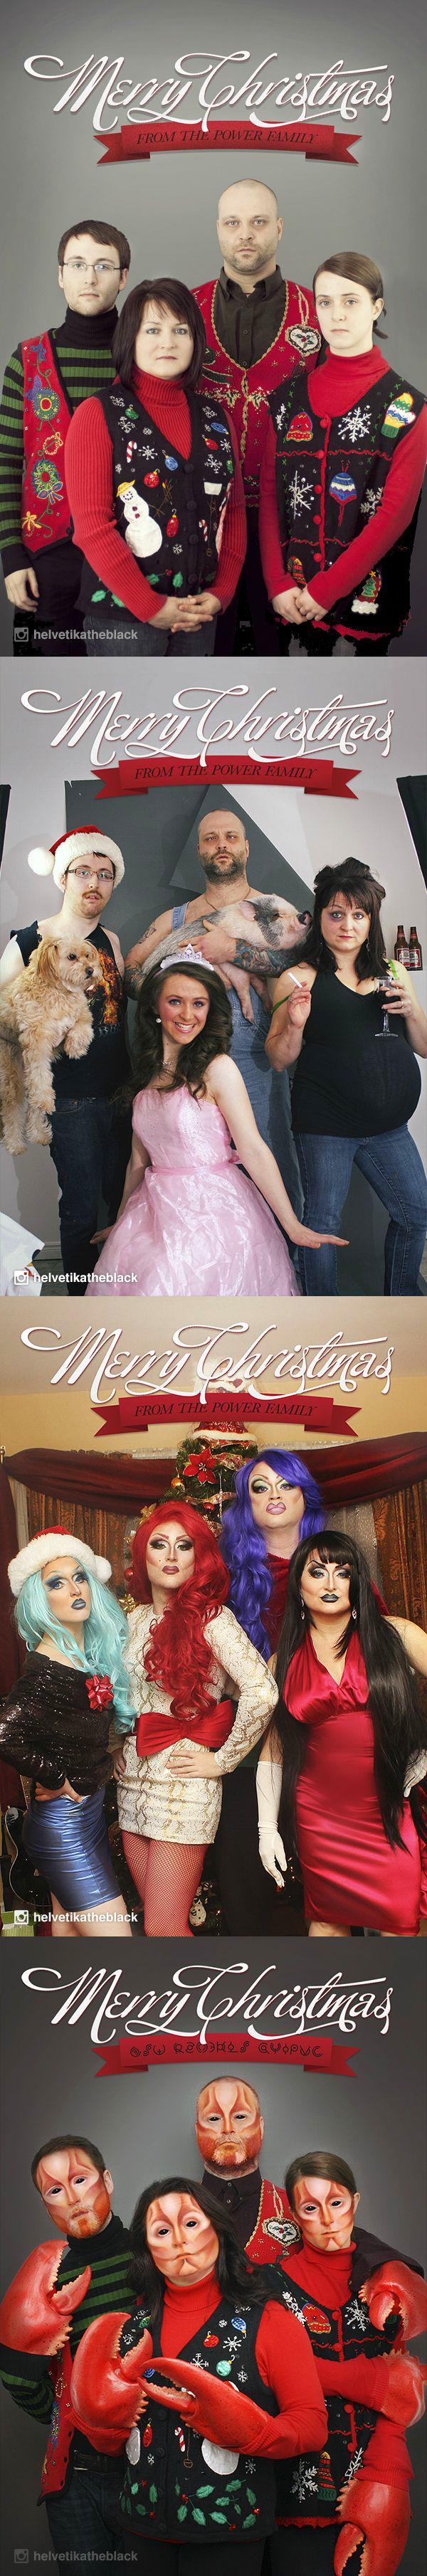 A family takes christmas photos for 4 years each with a different theme. One of them is where they are all ladies.